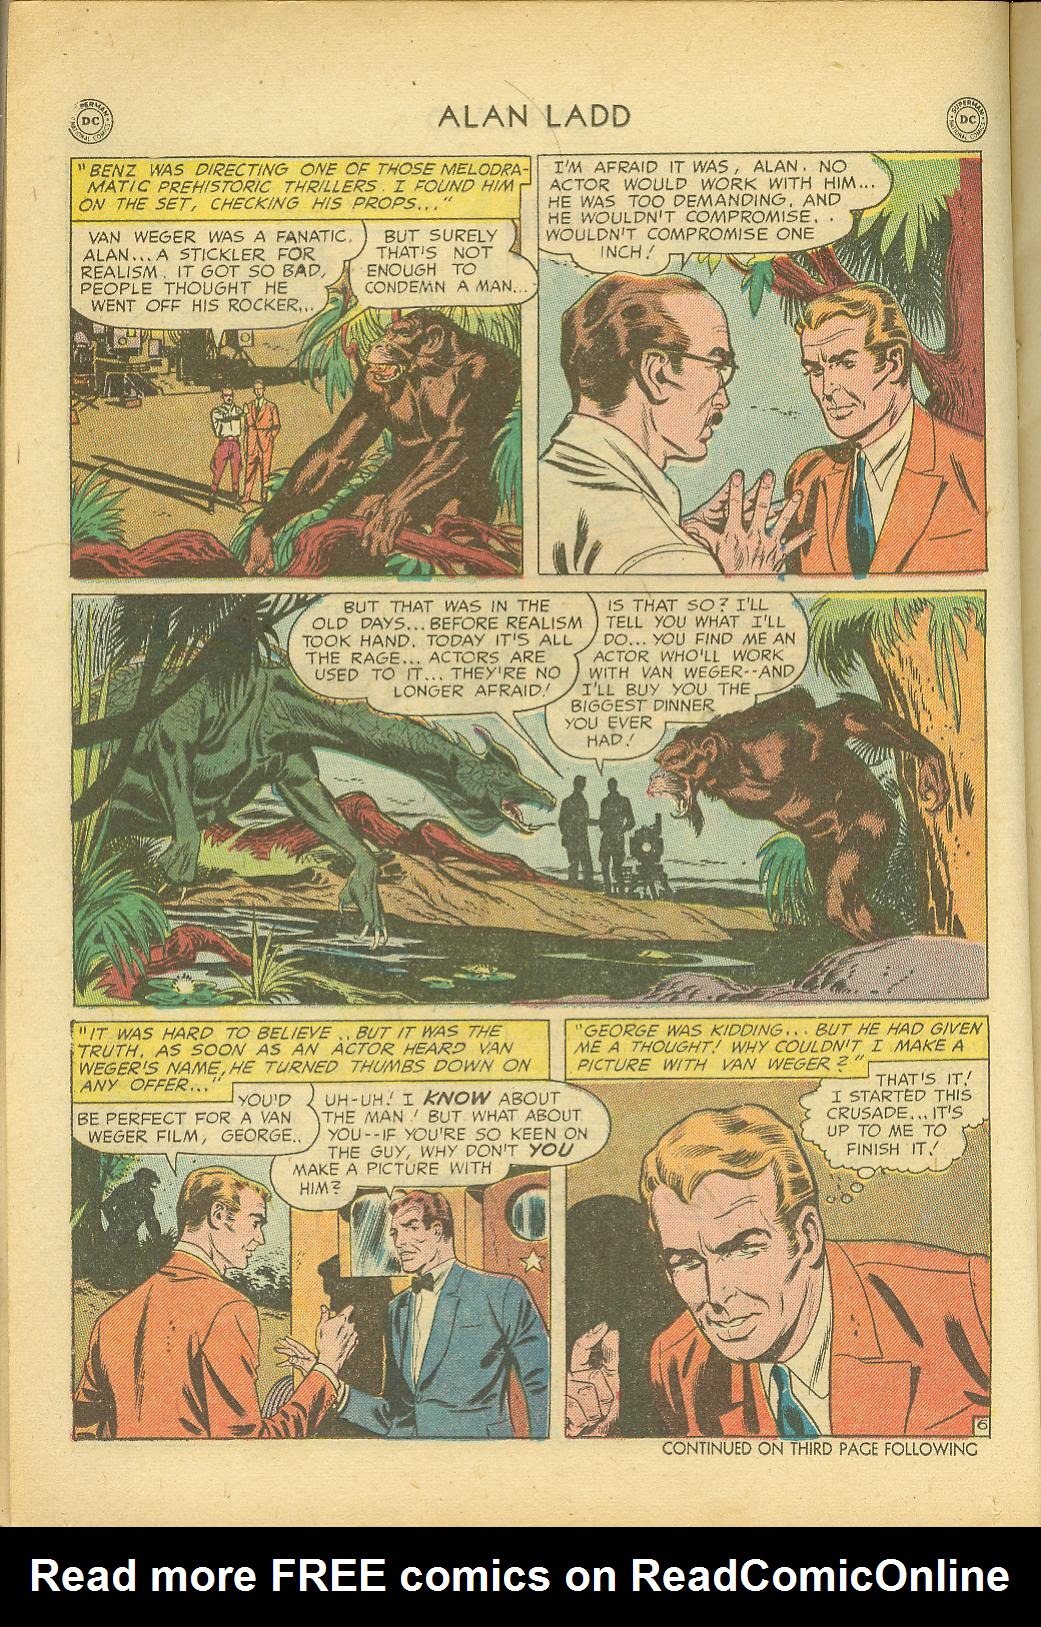 Read online Adventures of Alan Ladd comic -  Issue #5 - 18